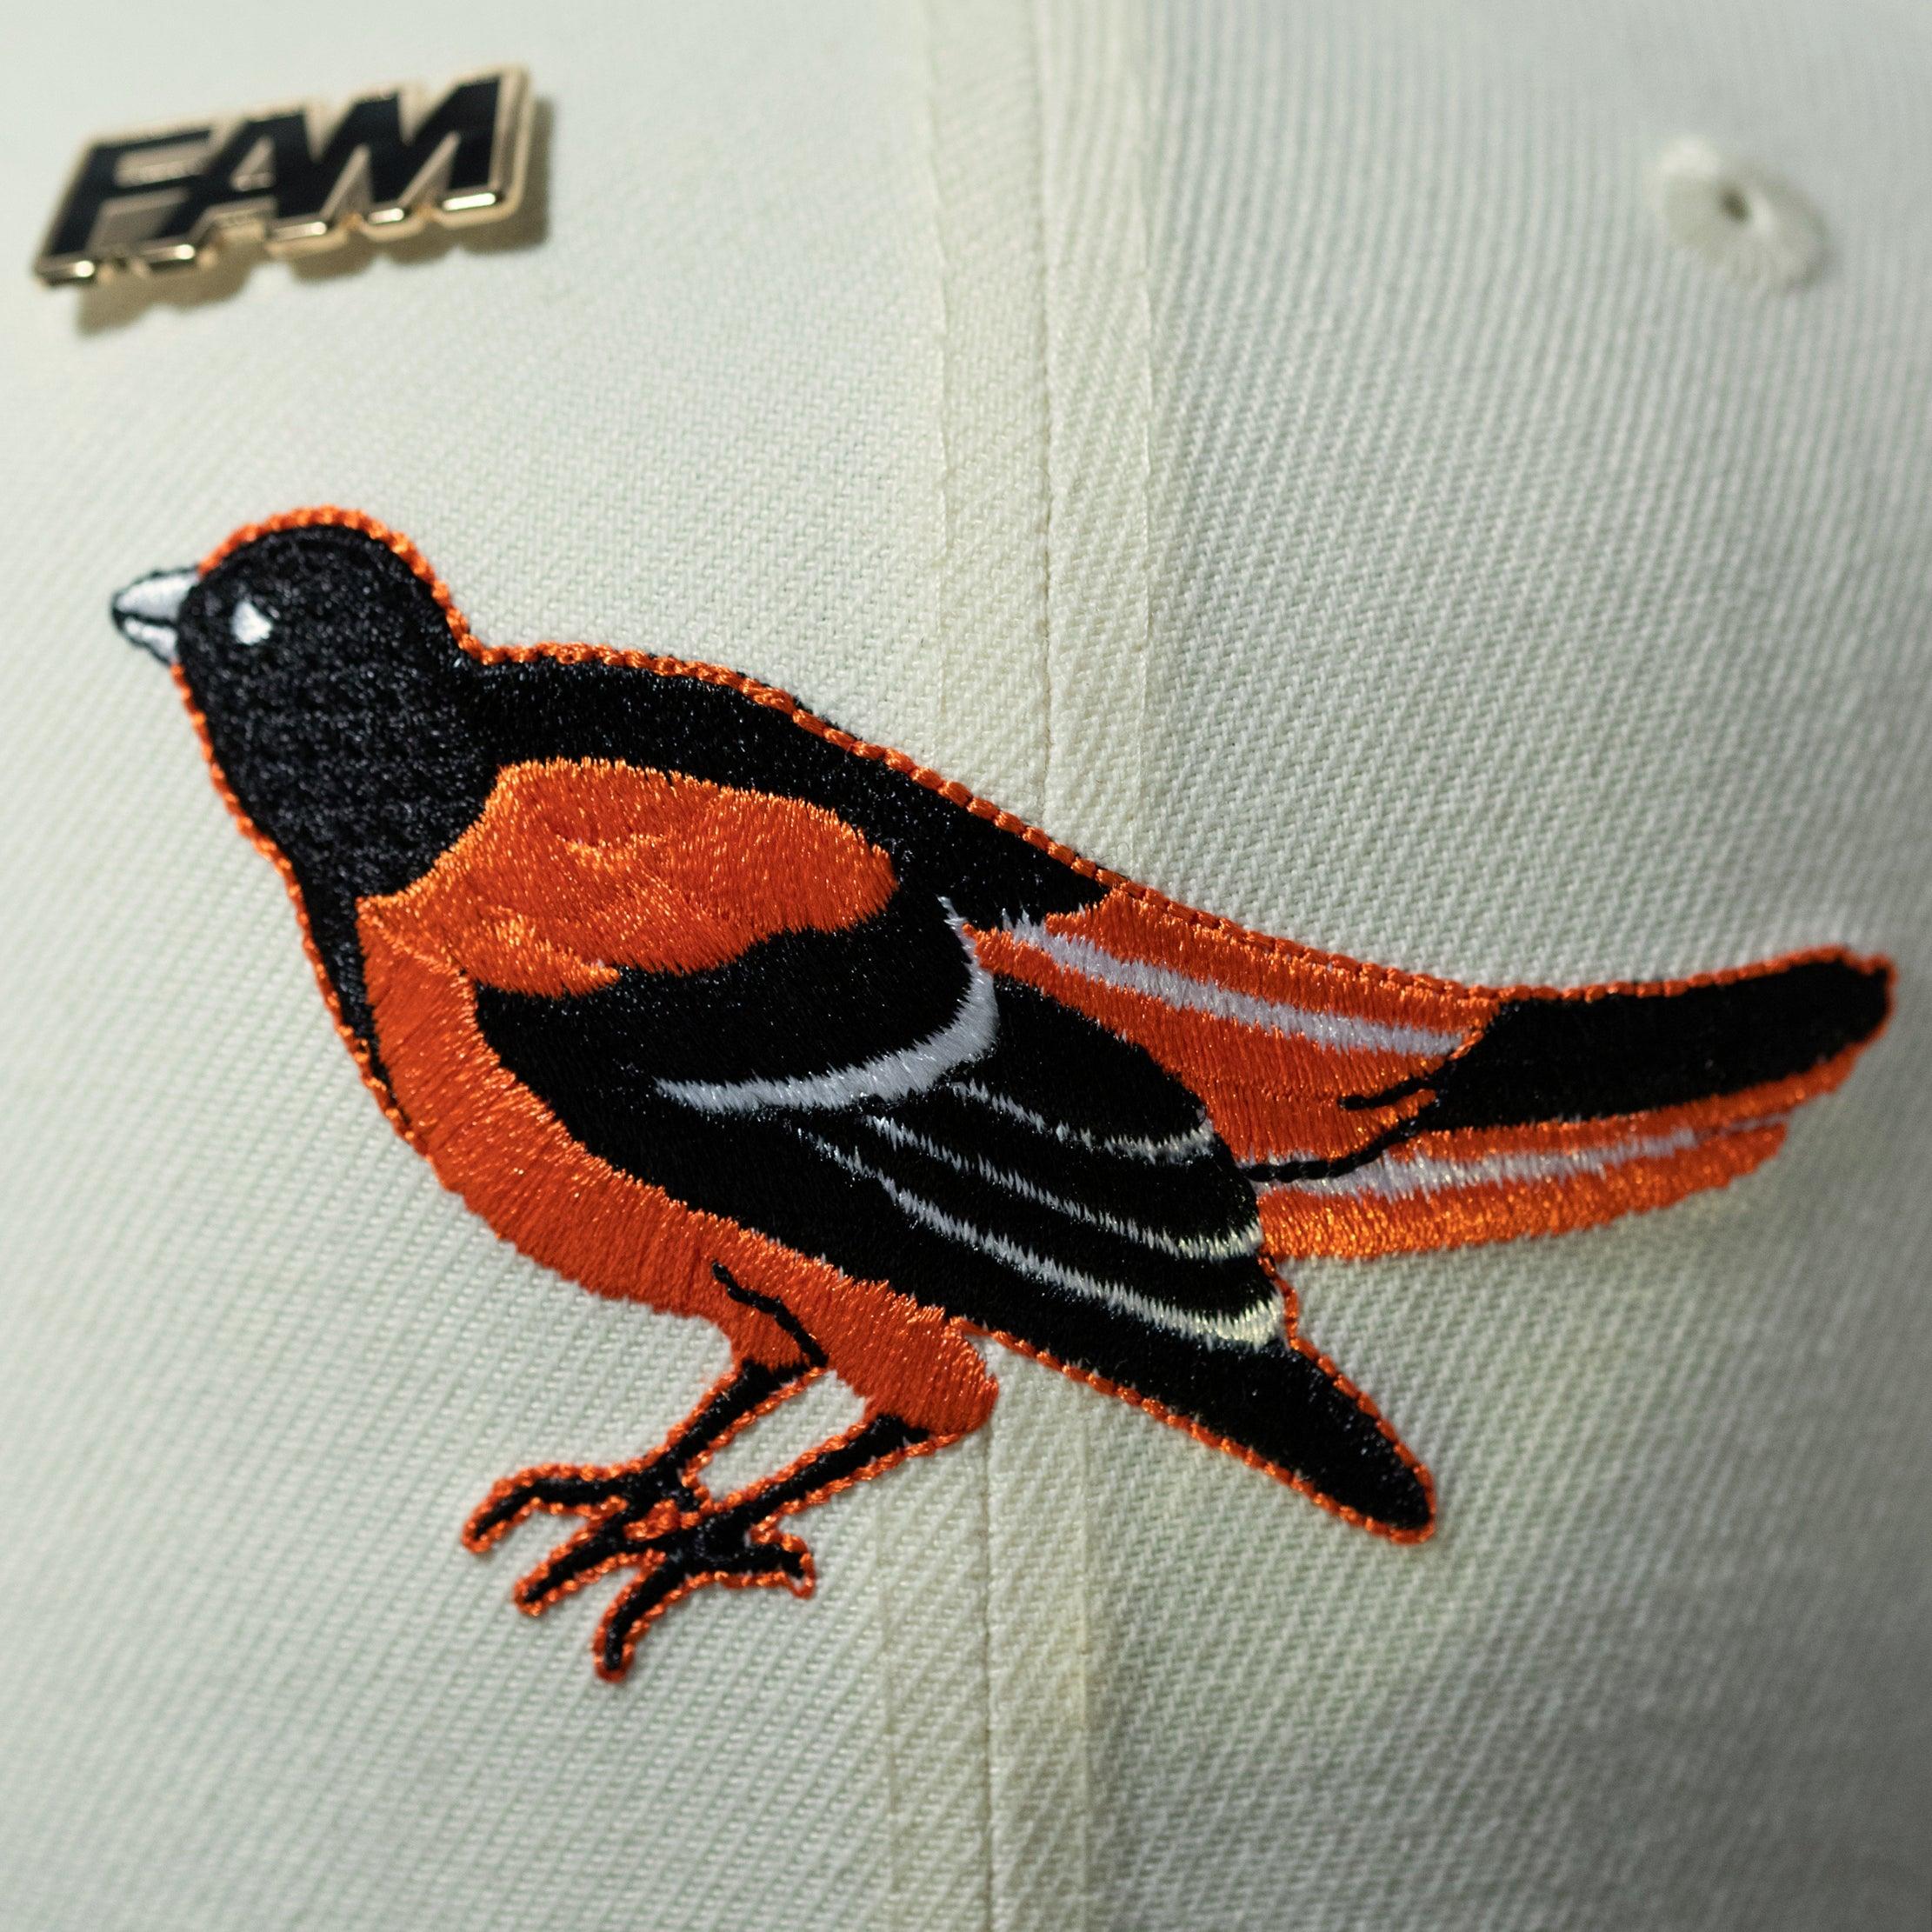 NEW ERA 59FIFTY MLB BALTIMORE ORIOLES ALL STAR GAME 1993 TWO TONE / ORANGE UV FITTED CAP - FAM